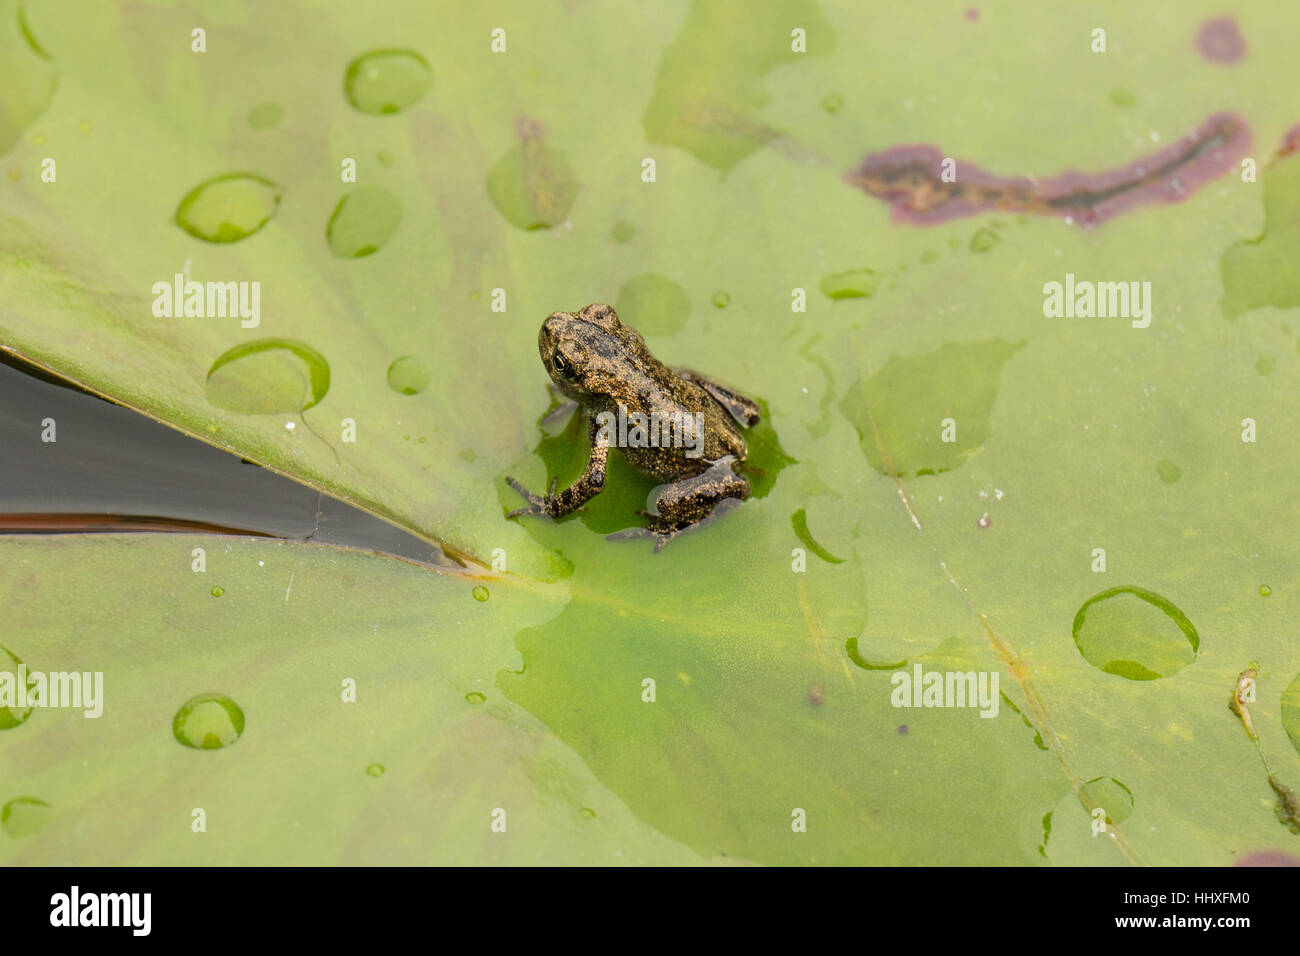 https://c8.alamy.com/comp/HHXFM0/small-baby-common-frog-sitting-on-a-waterlily-in-pond-next-to-water-HHXFM0.jpg